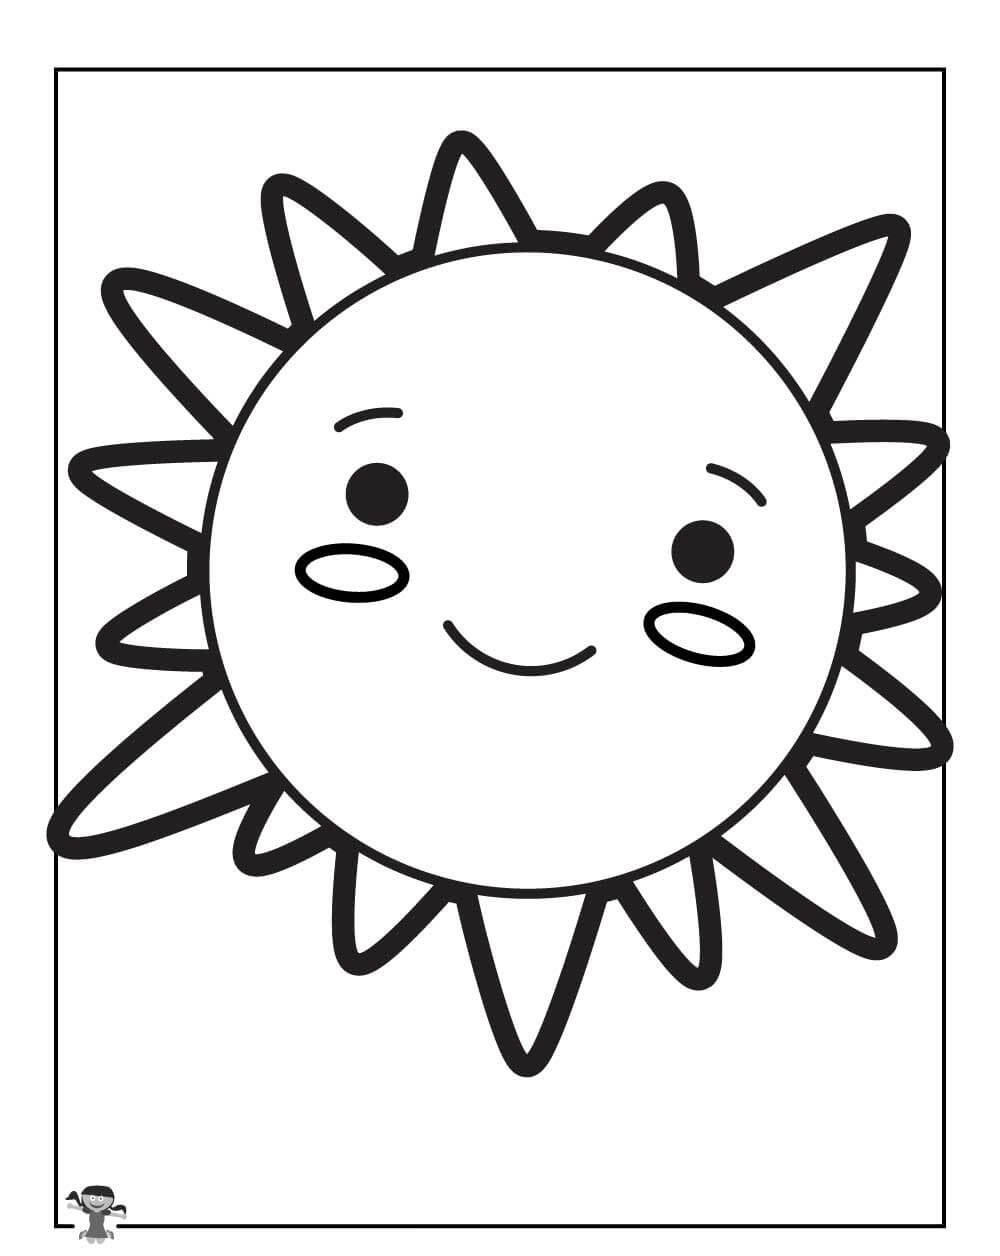 Cute sun coloring page